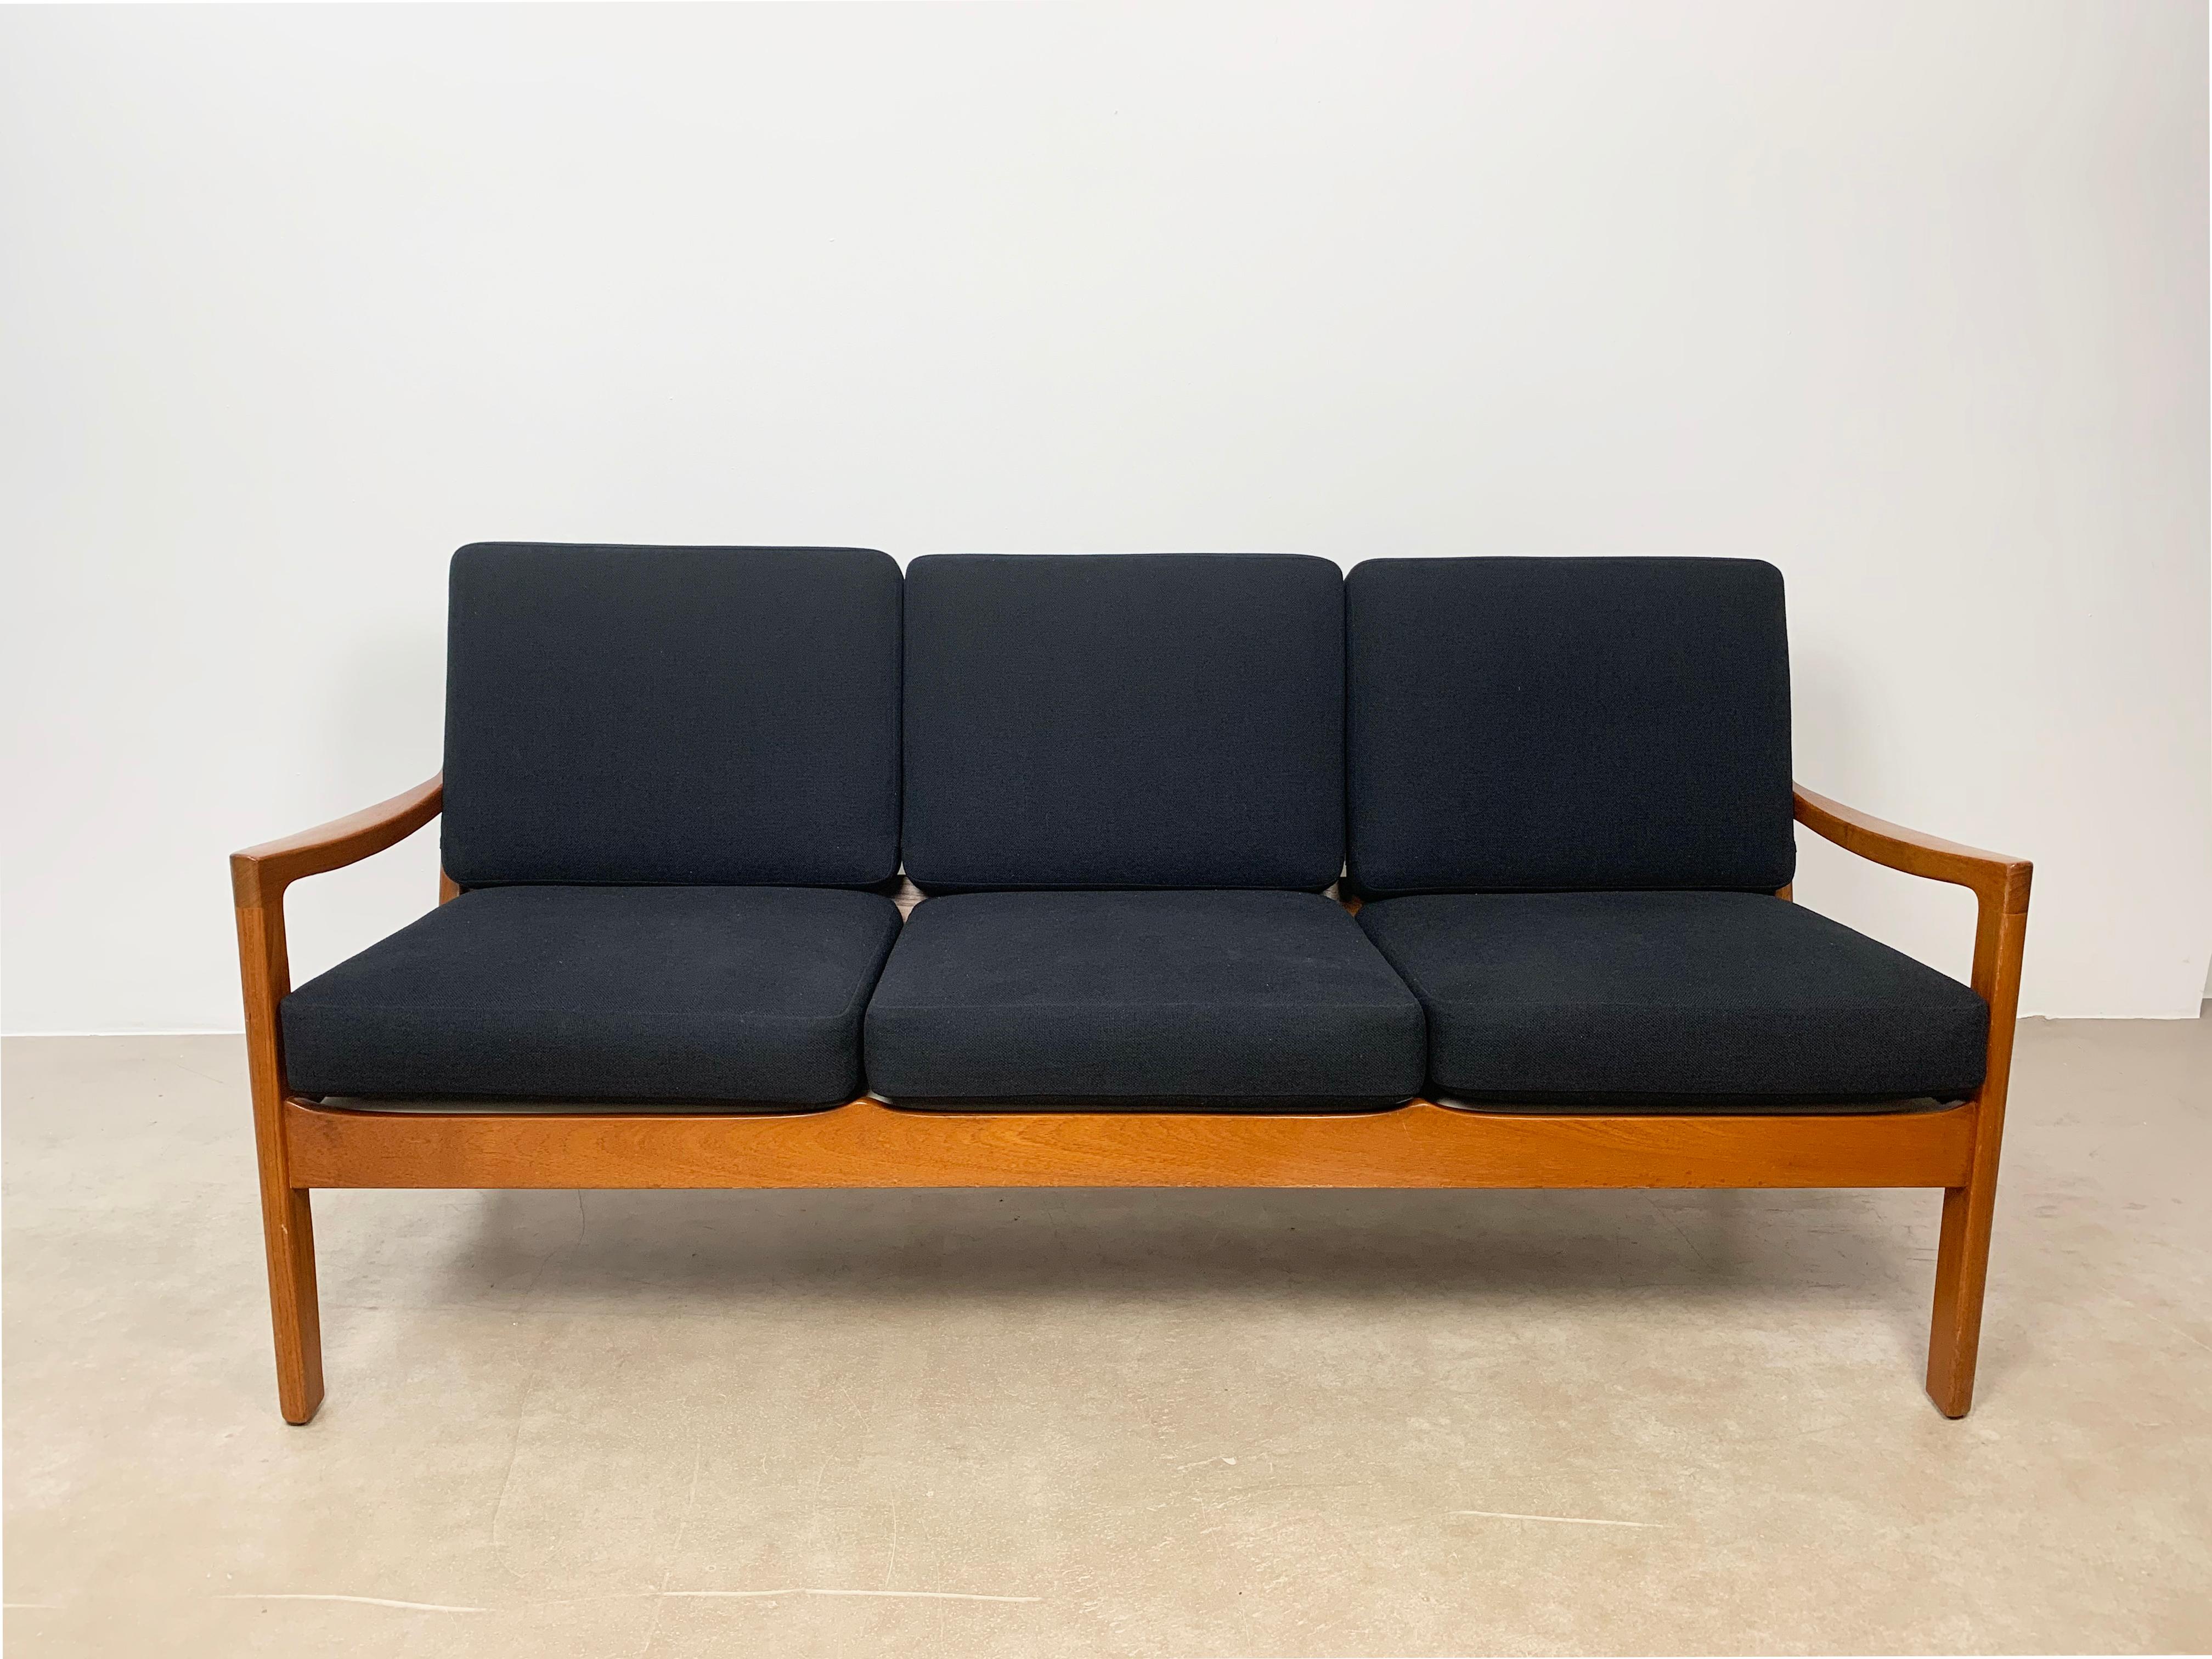 Ole Wanscher sofa Senator in solid teak. Designed in 1962 by Ole Wanscher model Senator Manufactured by France and Son in 1960’s. Newly upholstered.

Born in Copenhagen in 1903 (died 1985), Danish architect-designer Ole Wanscher was a key player